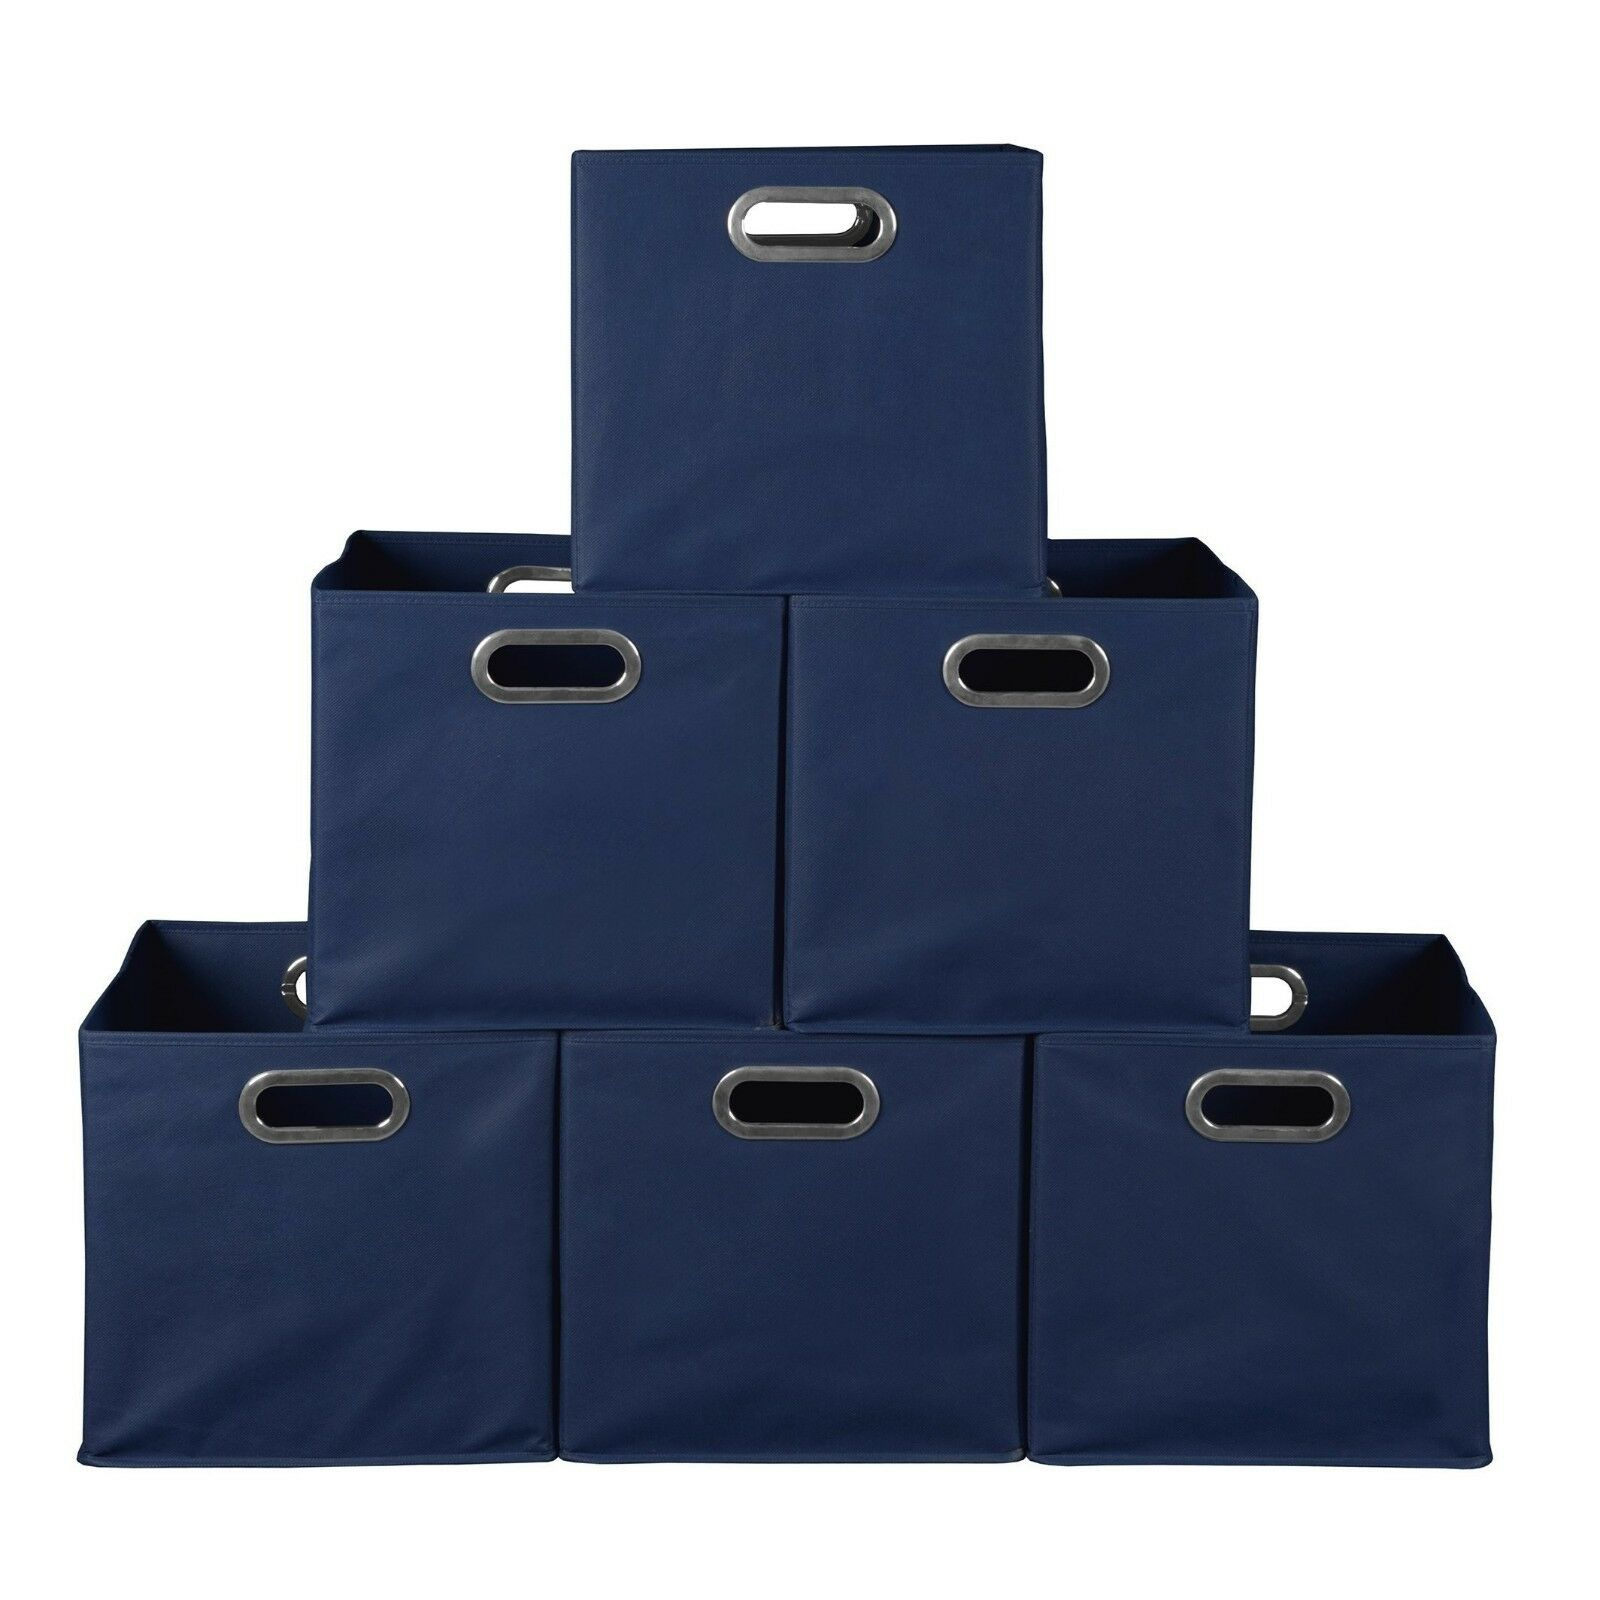 File Storage Bins 6 Cube Closet Organizers And Toy Square Foldable within sizing 1600 X 1600